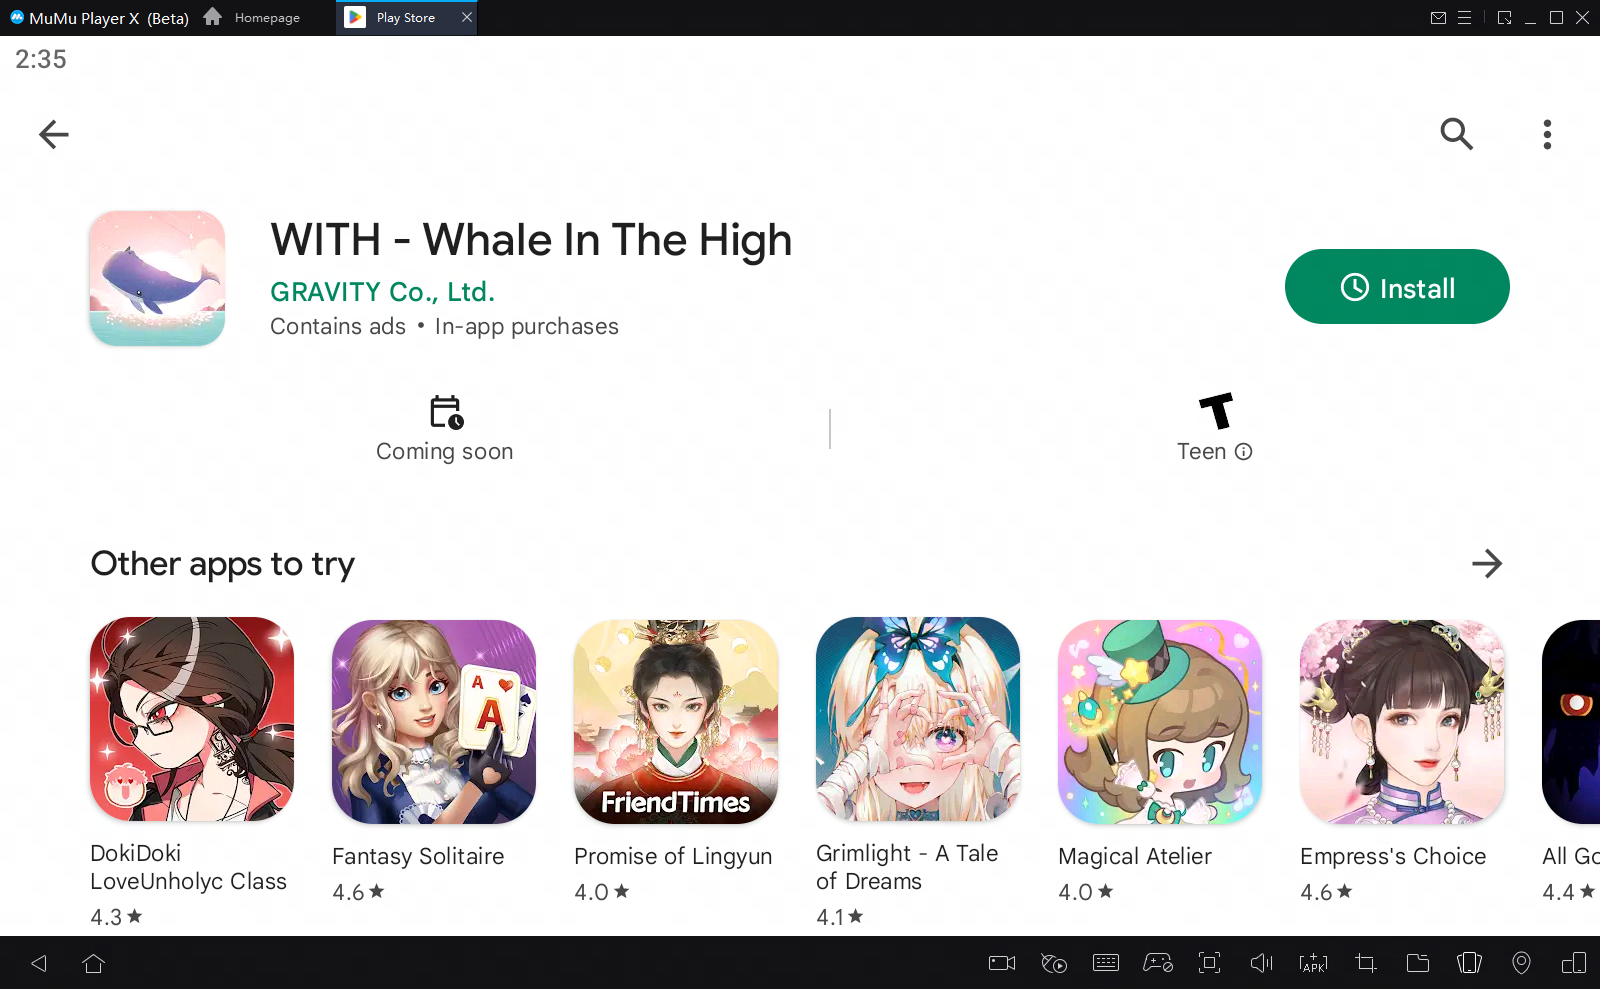 WITH - Whale In The High on PC